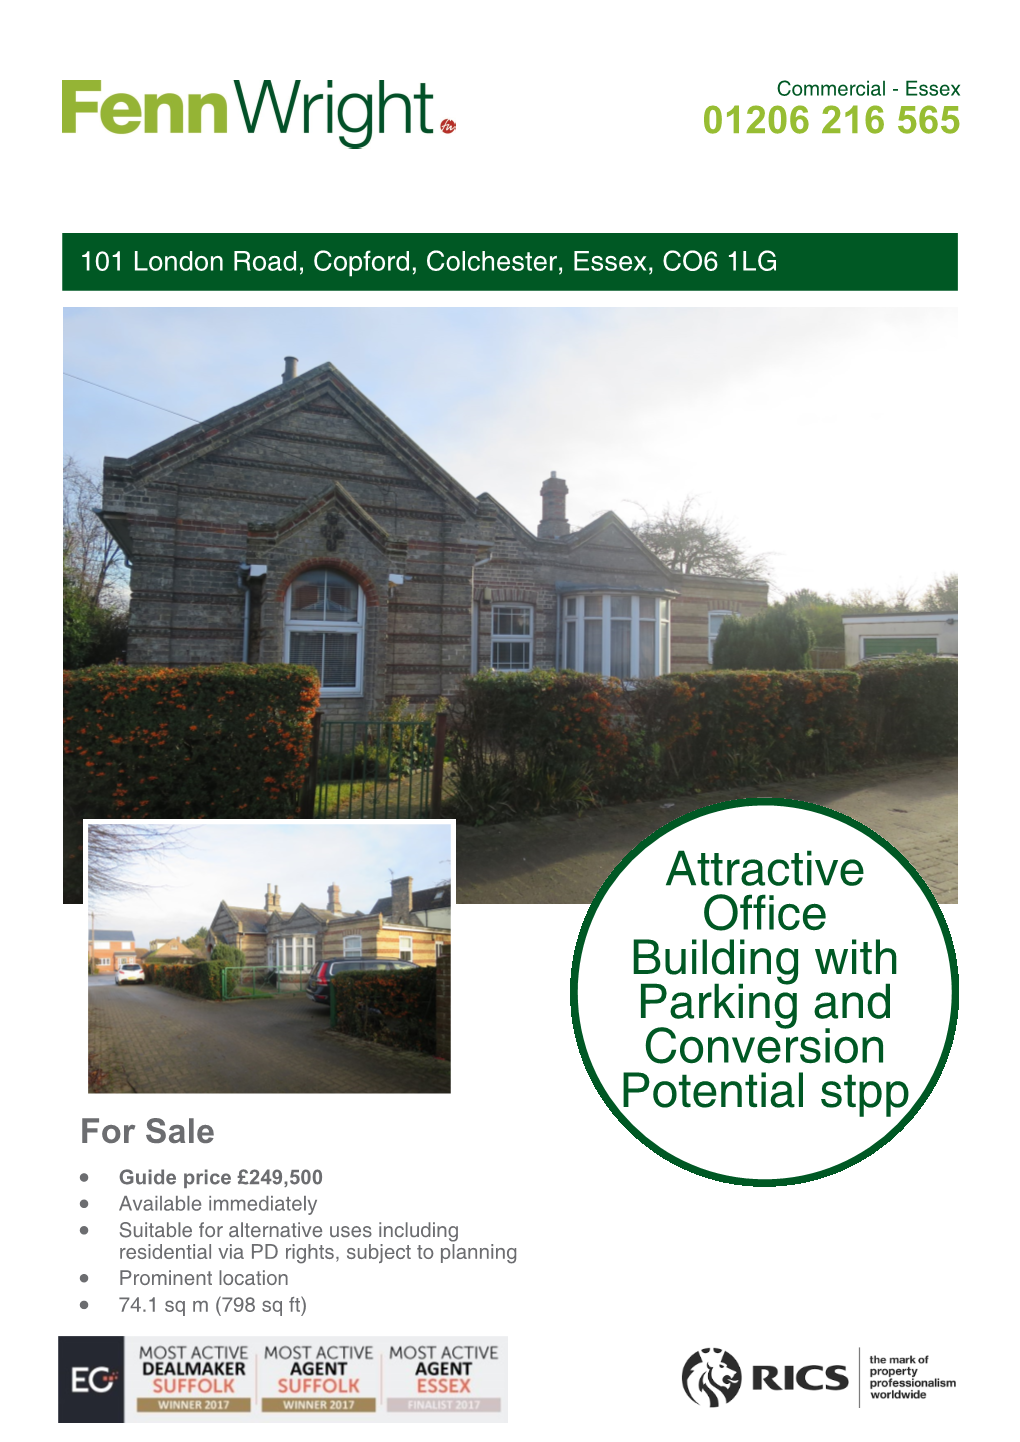 Attractive Office Building with Parking and Conversion Potential Stpp